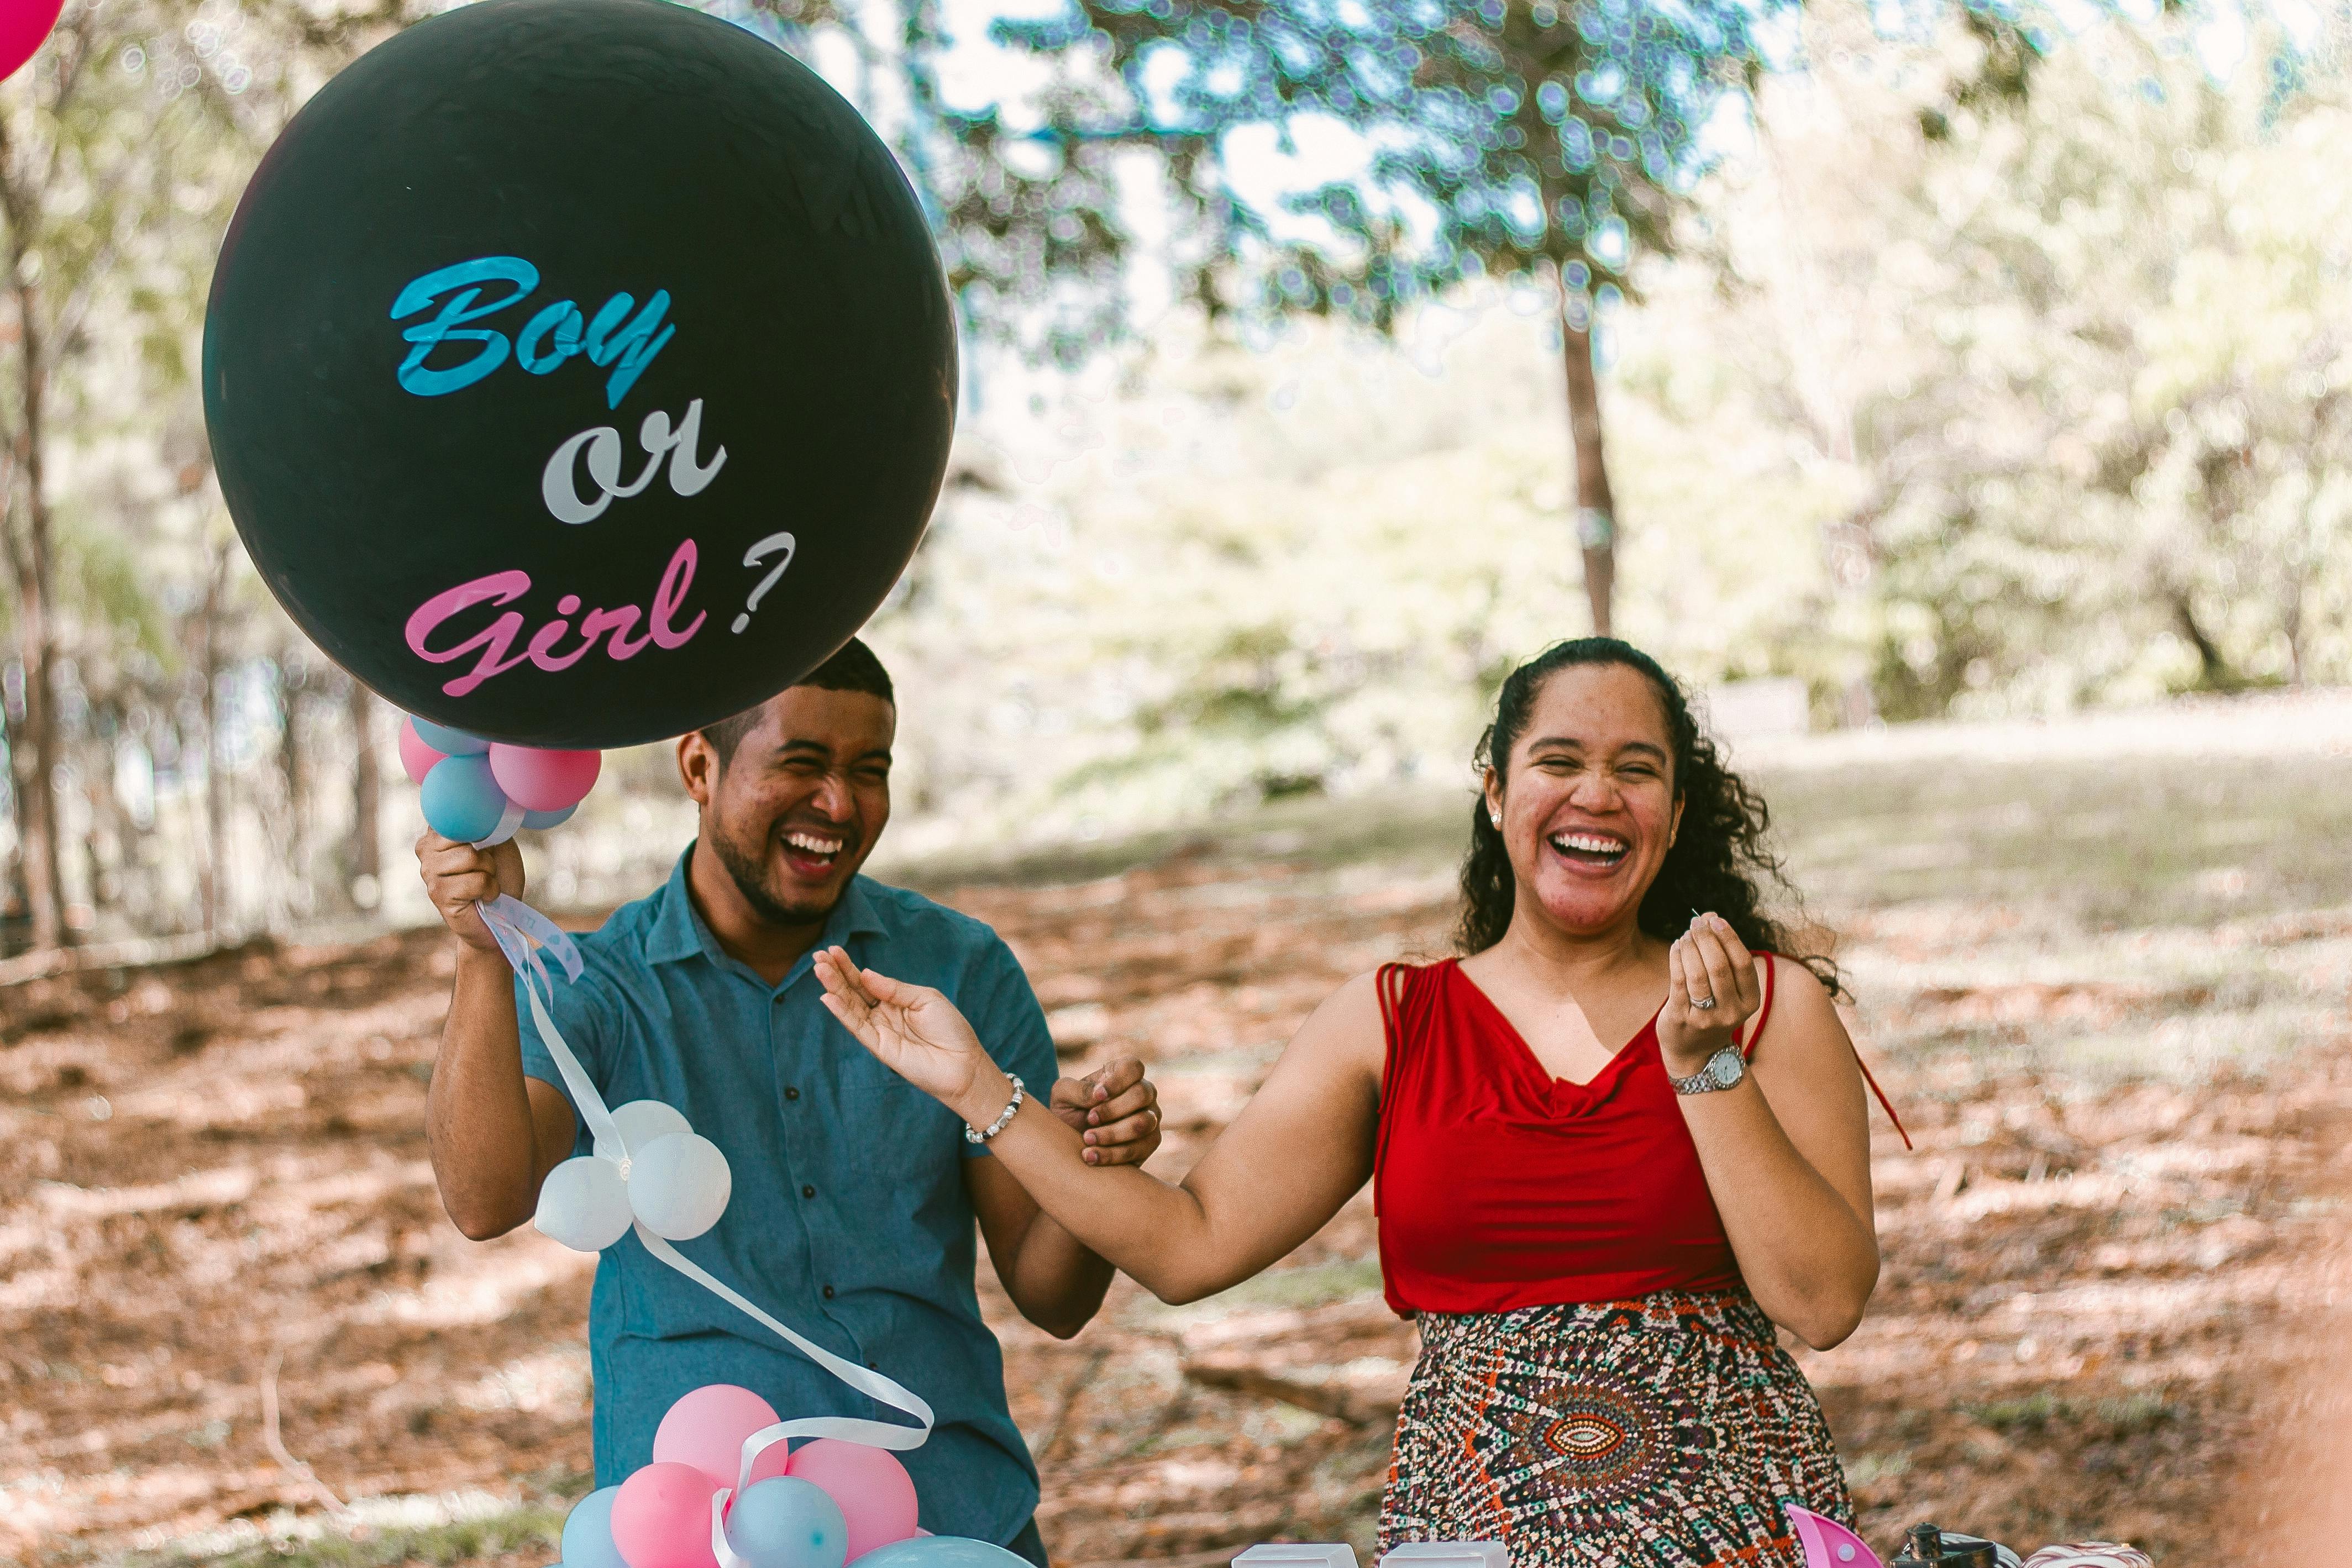 A man and pregnant woman laughing at a gender reveal party | Source: Pexels